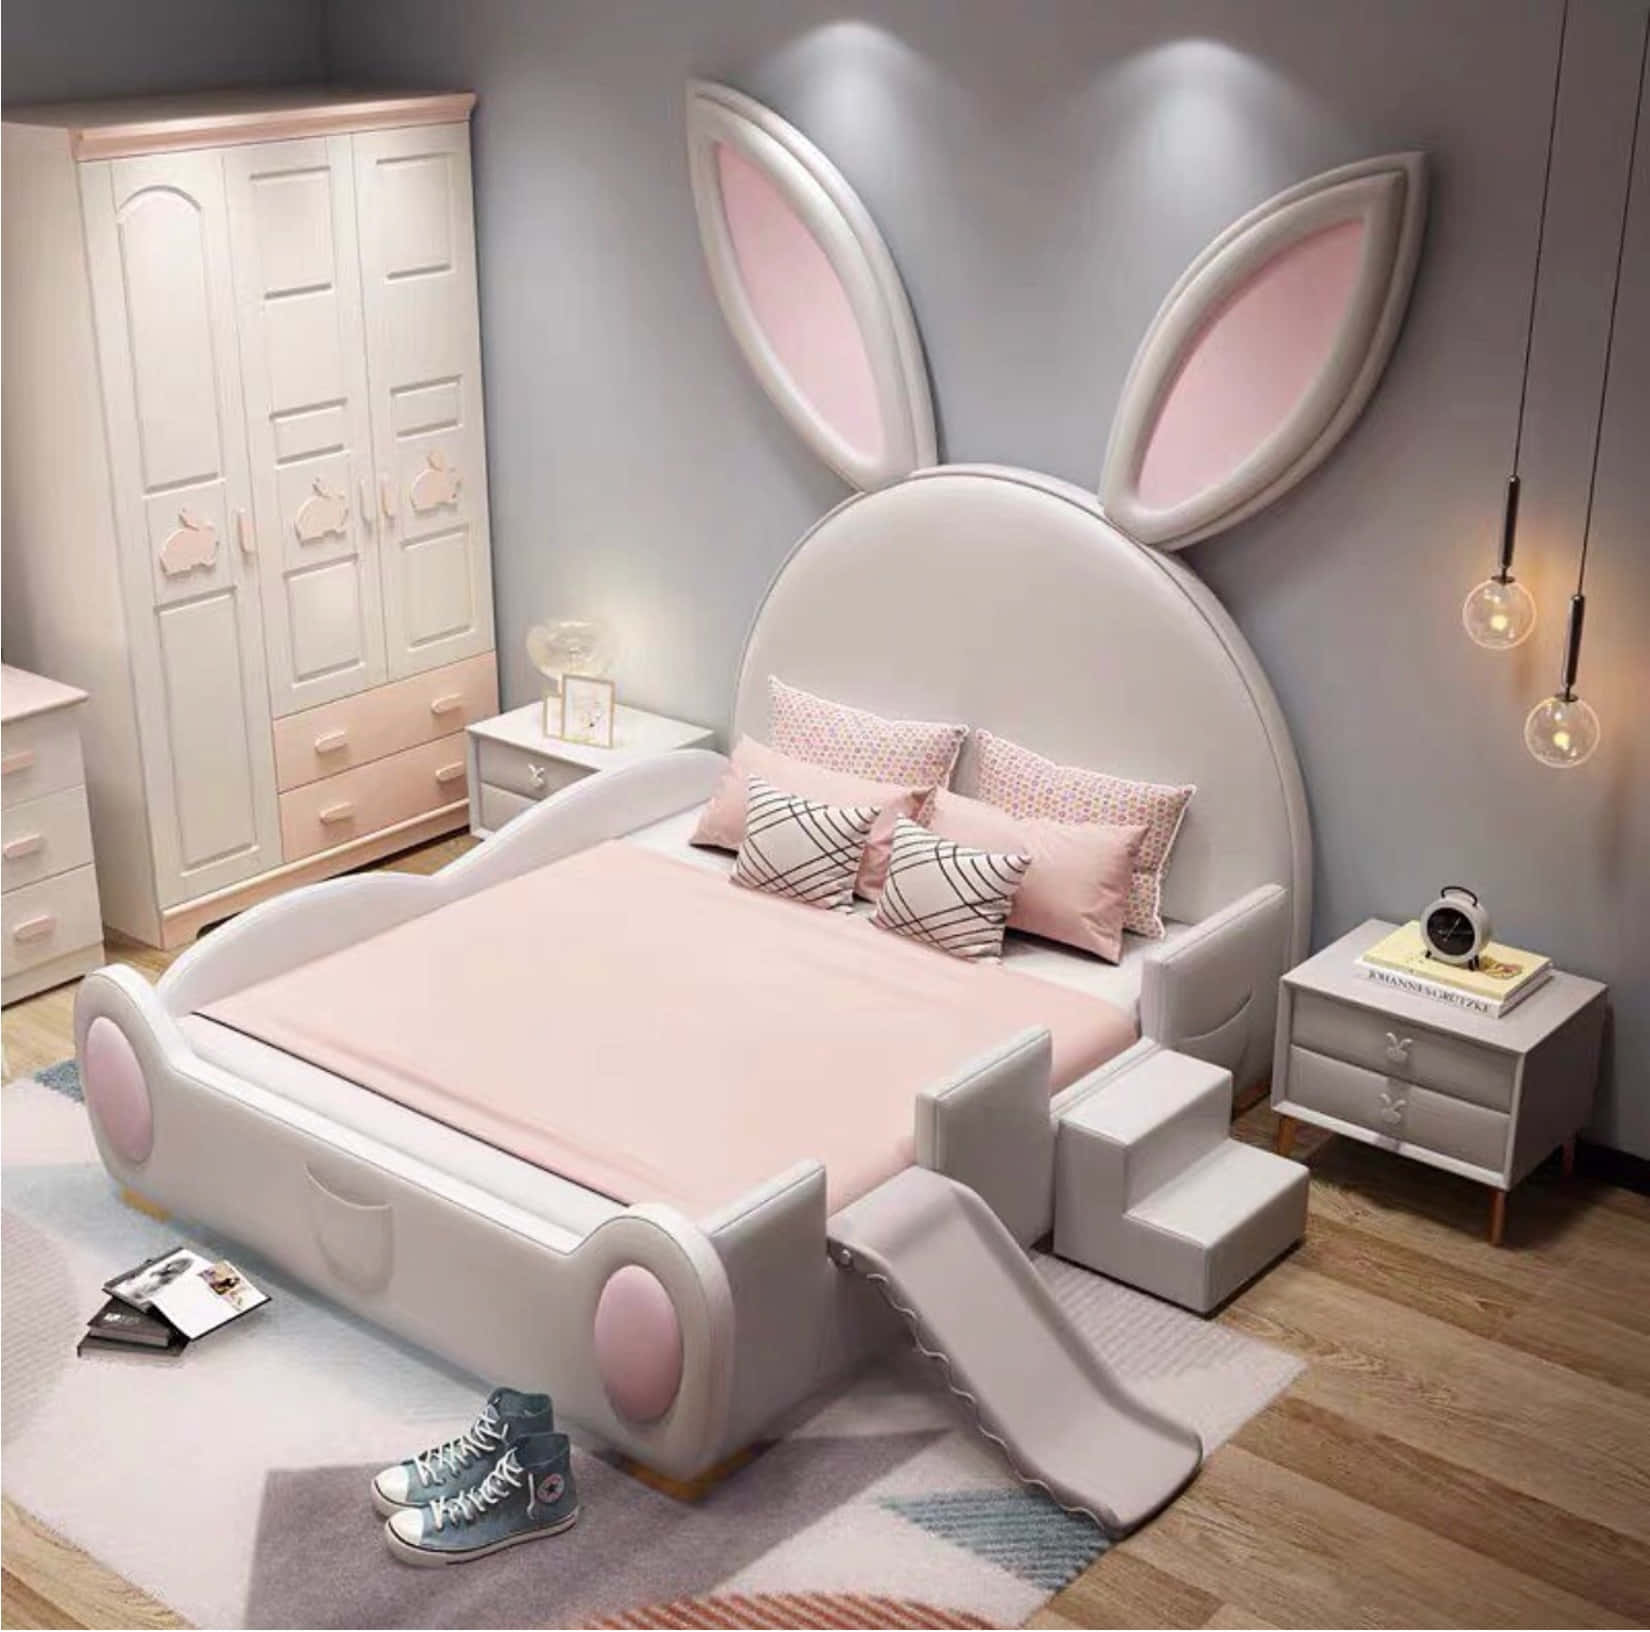 Kawaii Room with Pastel Colors and Cute Decorations Wallpaper